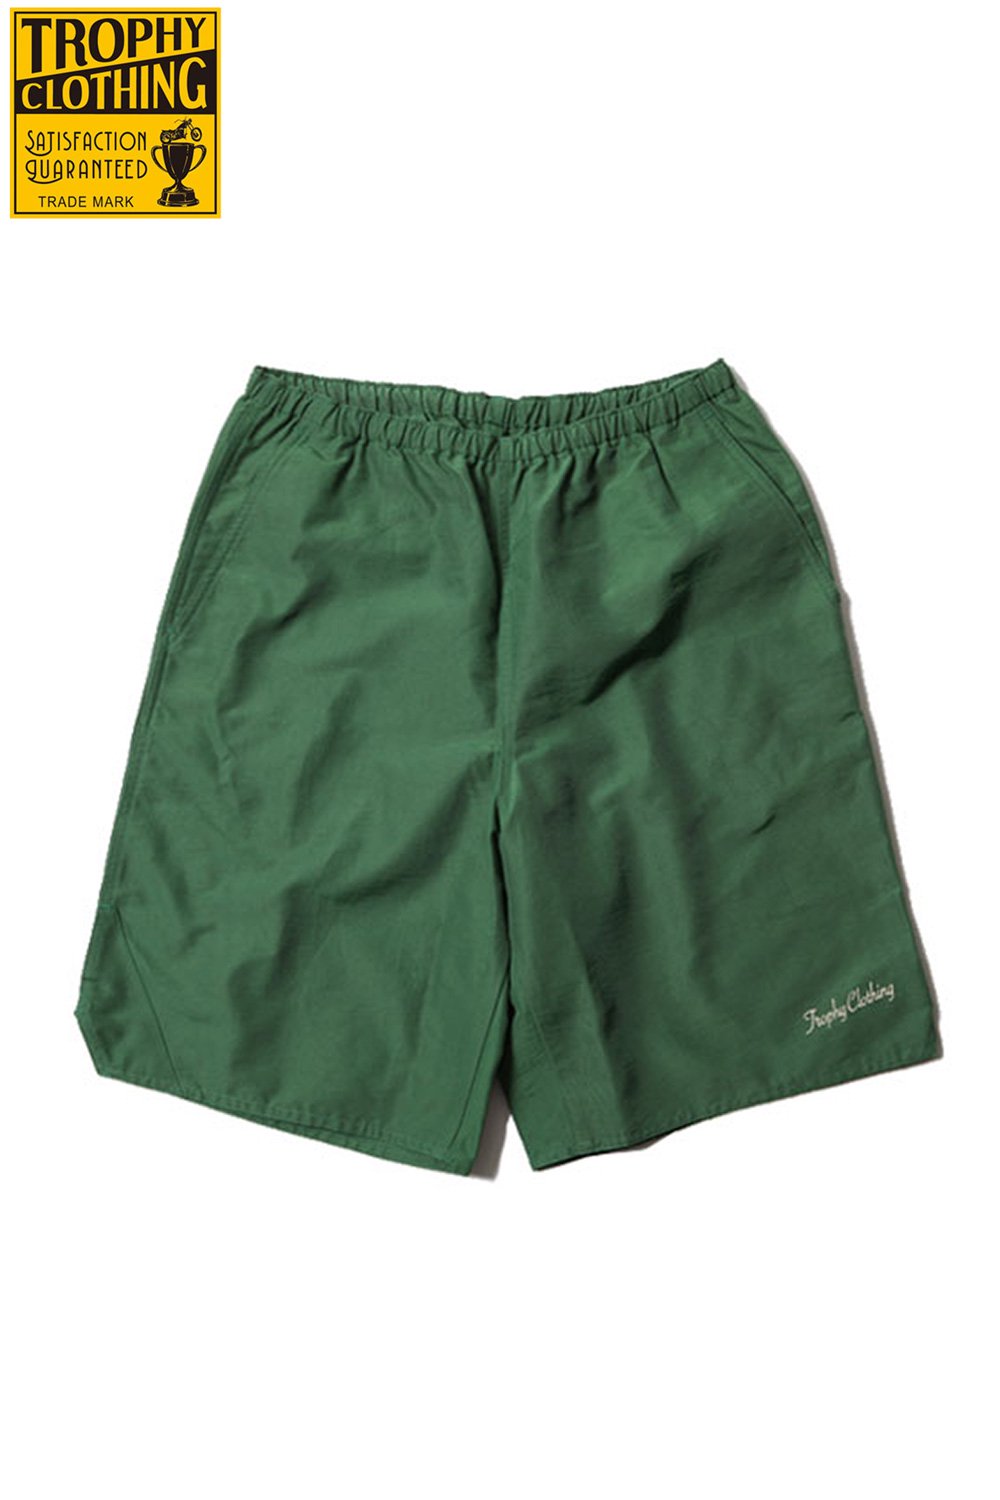 TROPHY CLOTHING(トロフィークロージング) ジムショーツ Gym Shorts TR20SS-406 通販正規取扱 |  ハーレムストア公式通販サイト